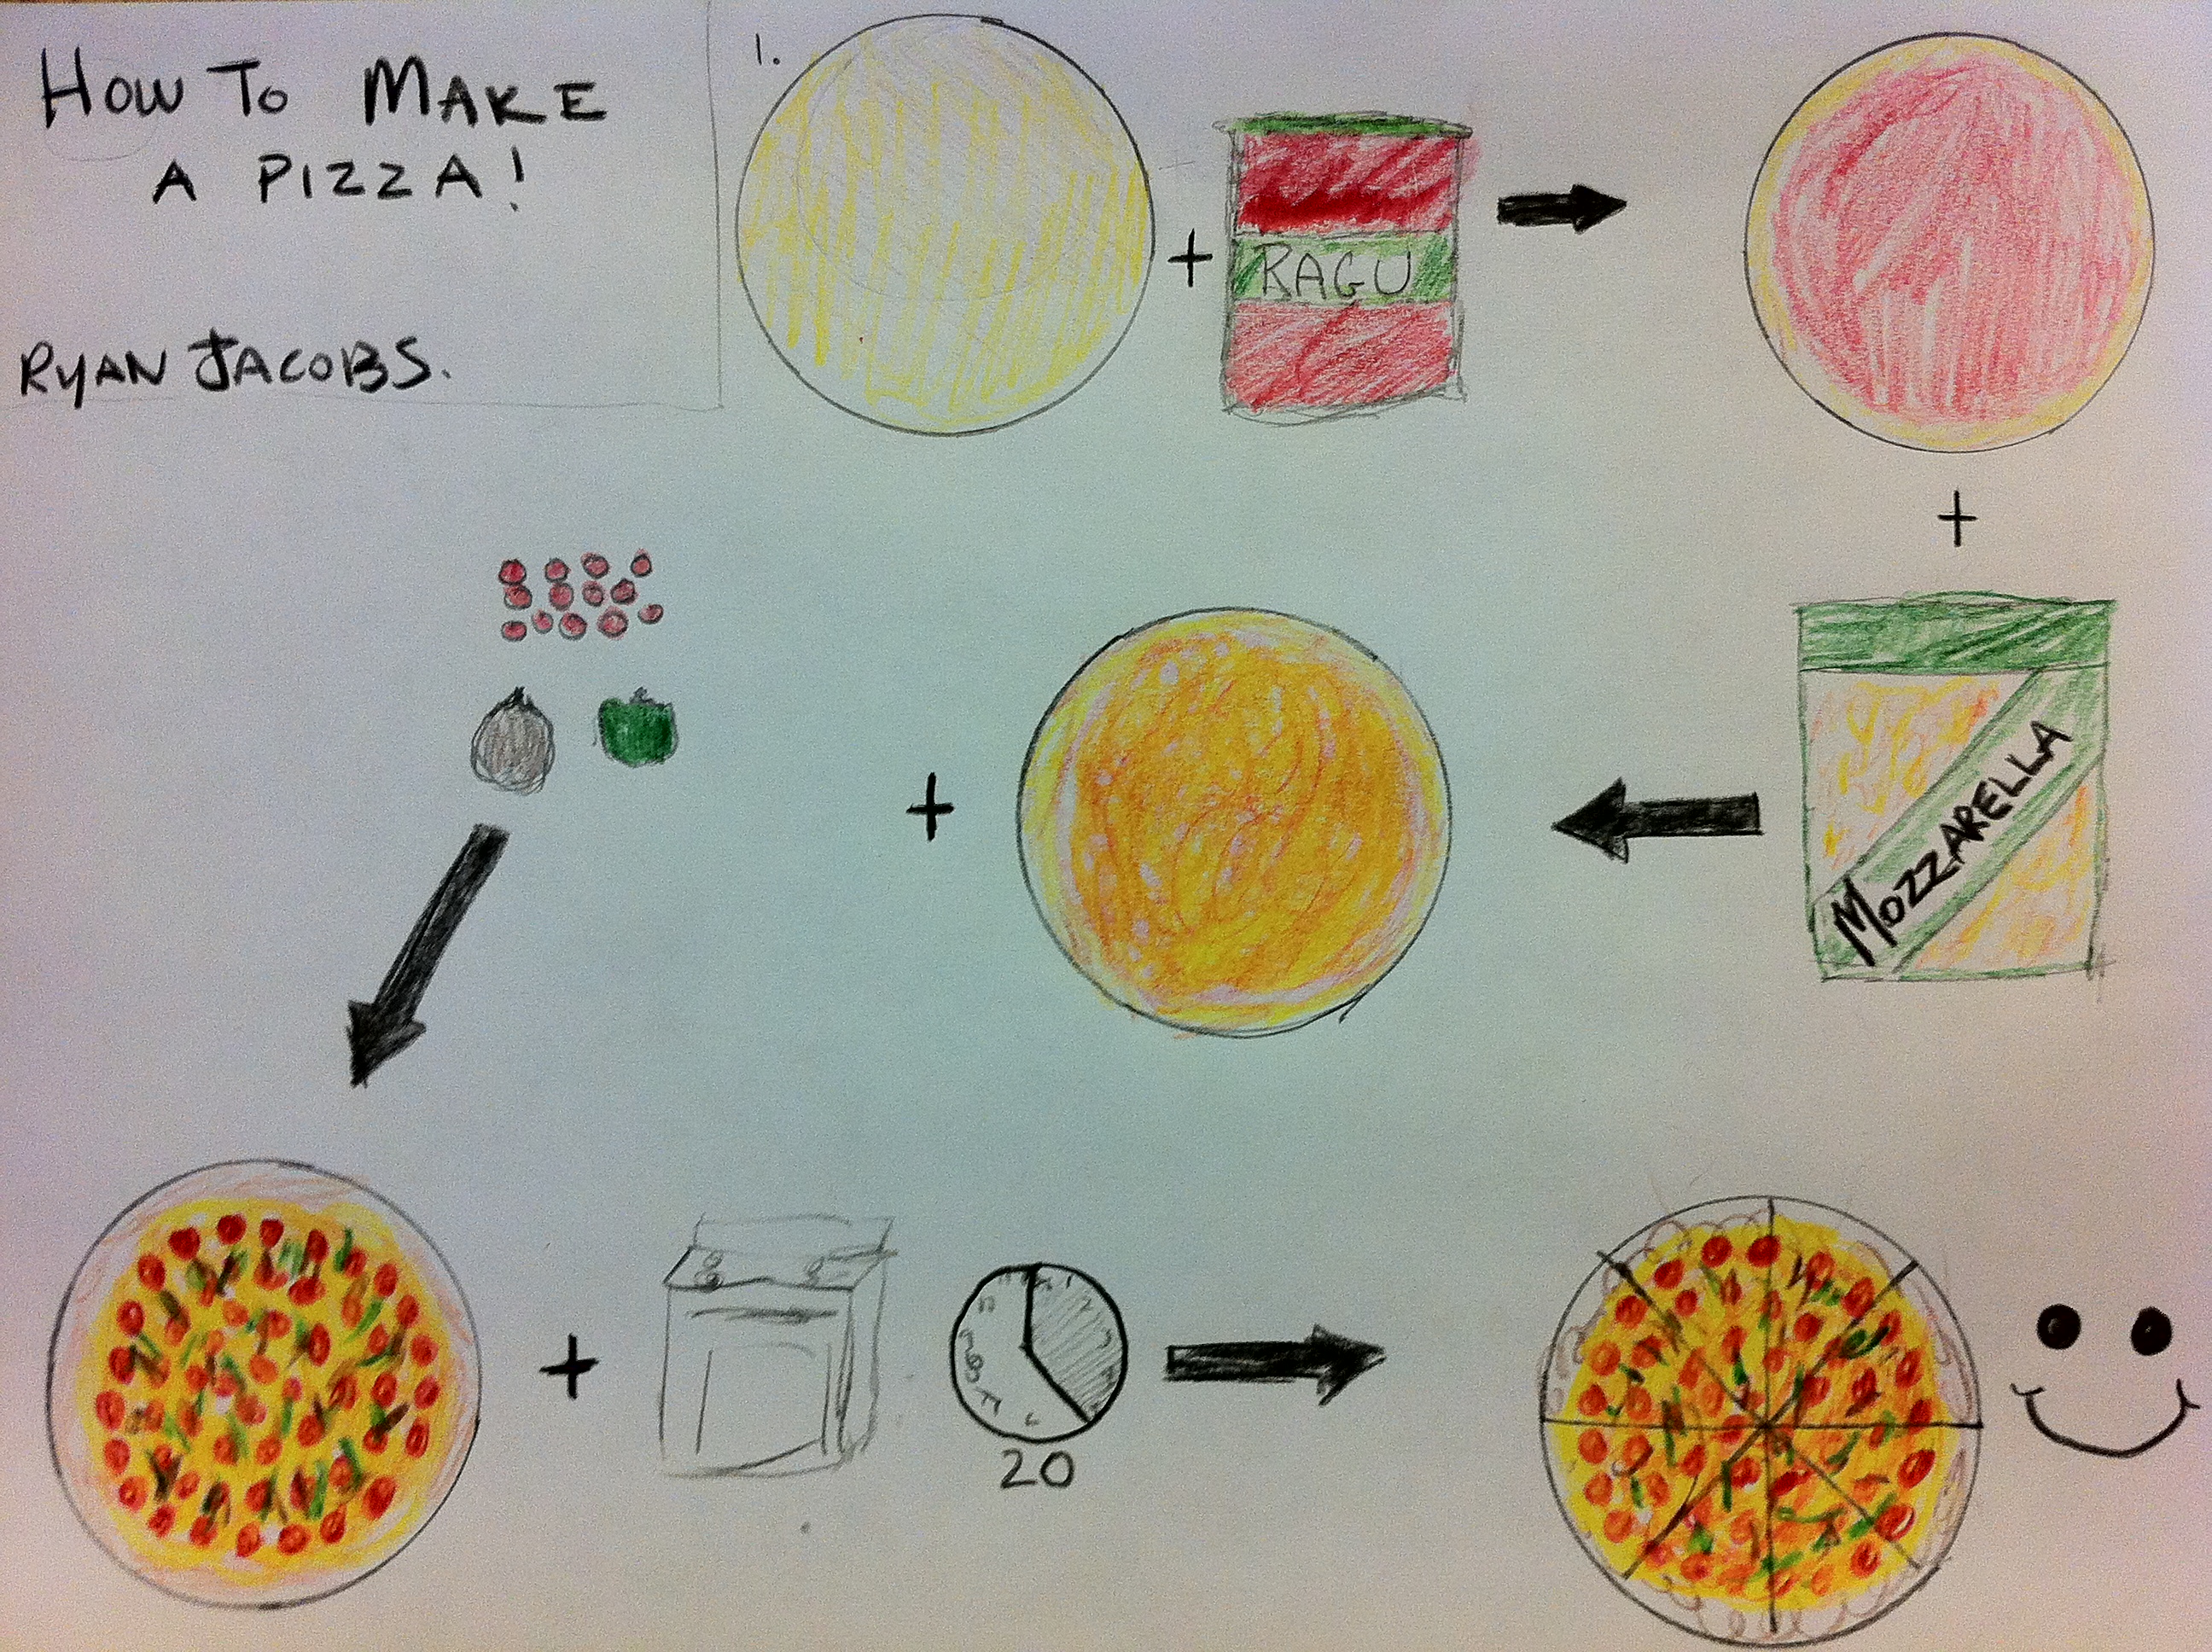 How To Make a Pizza!  rjacobscomm28